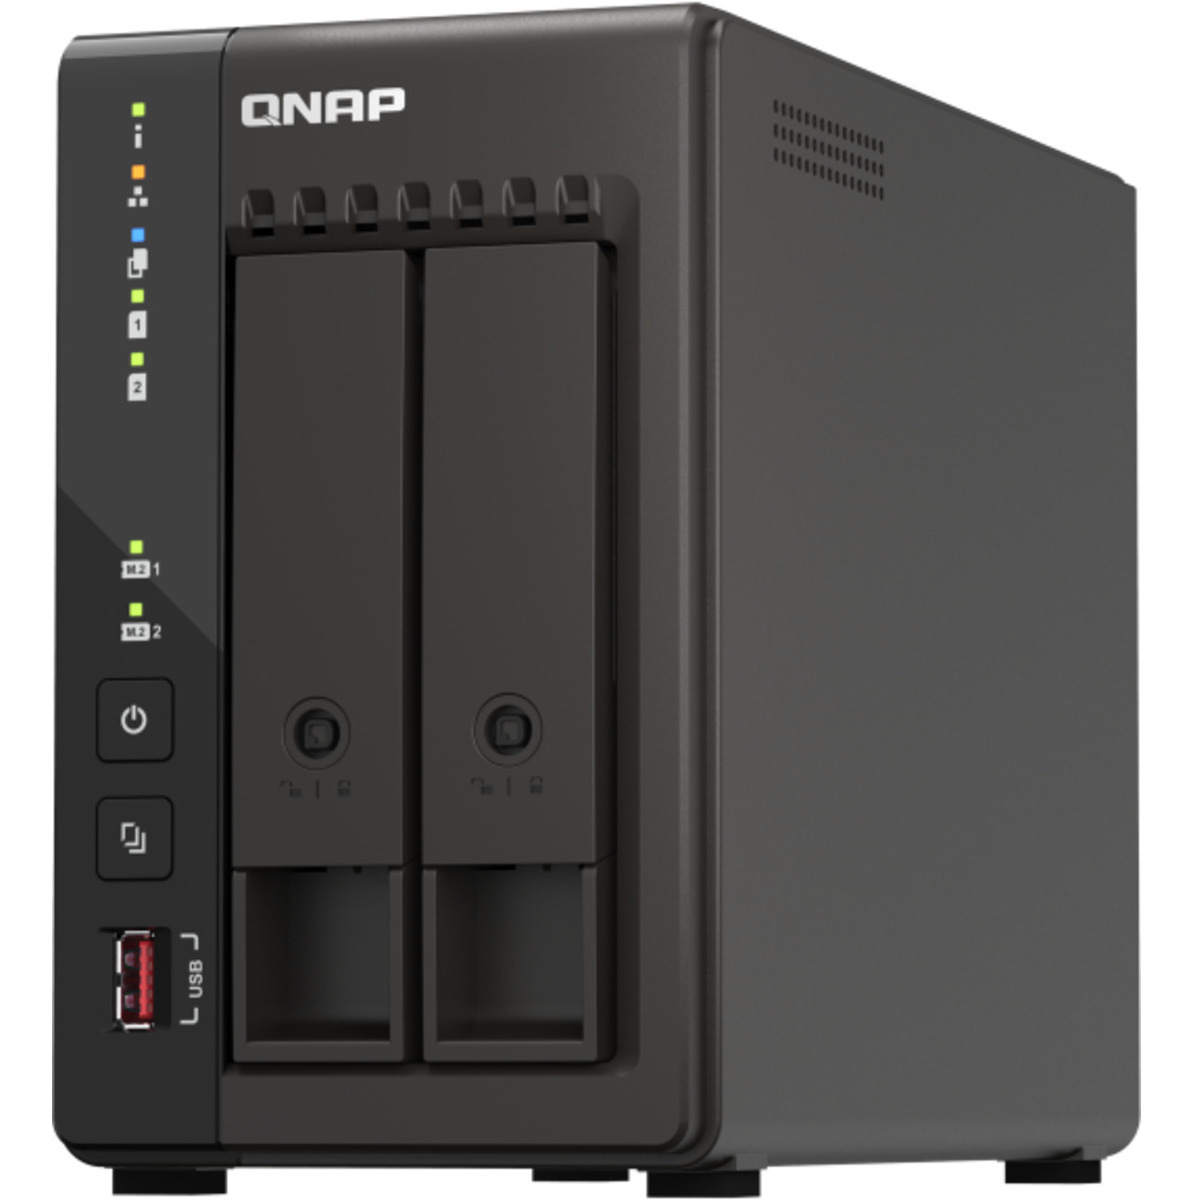 buy $1575 QNAP TS-253E 40tb Desktop NAS - Network Attached Storage Device 2x20000gb Western Digital Red Pro WD201KFGX 3.5 7200rpm SATA 6Gb/s HDD NAS Class Drives Installed - Burn-In Tested - nas headquarters buy network attached storage server device das new raid-5 free shipping simply usa TS-253E